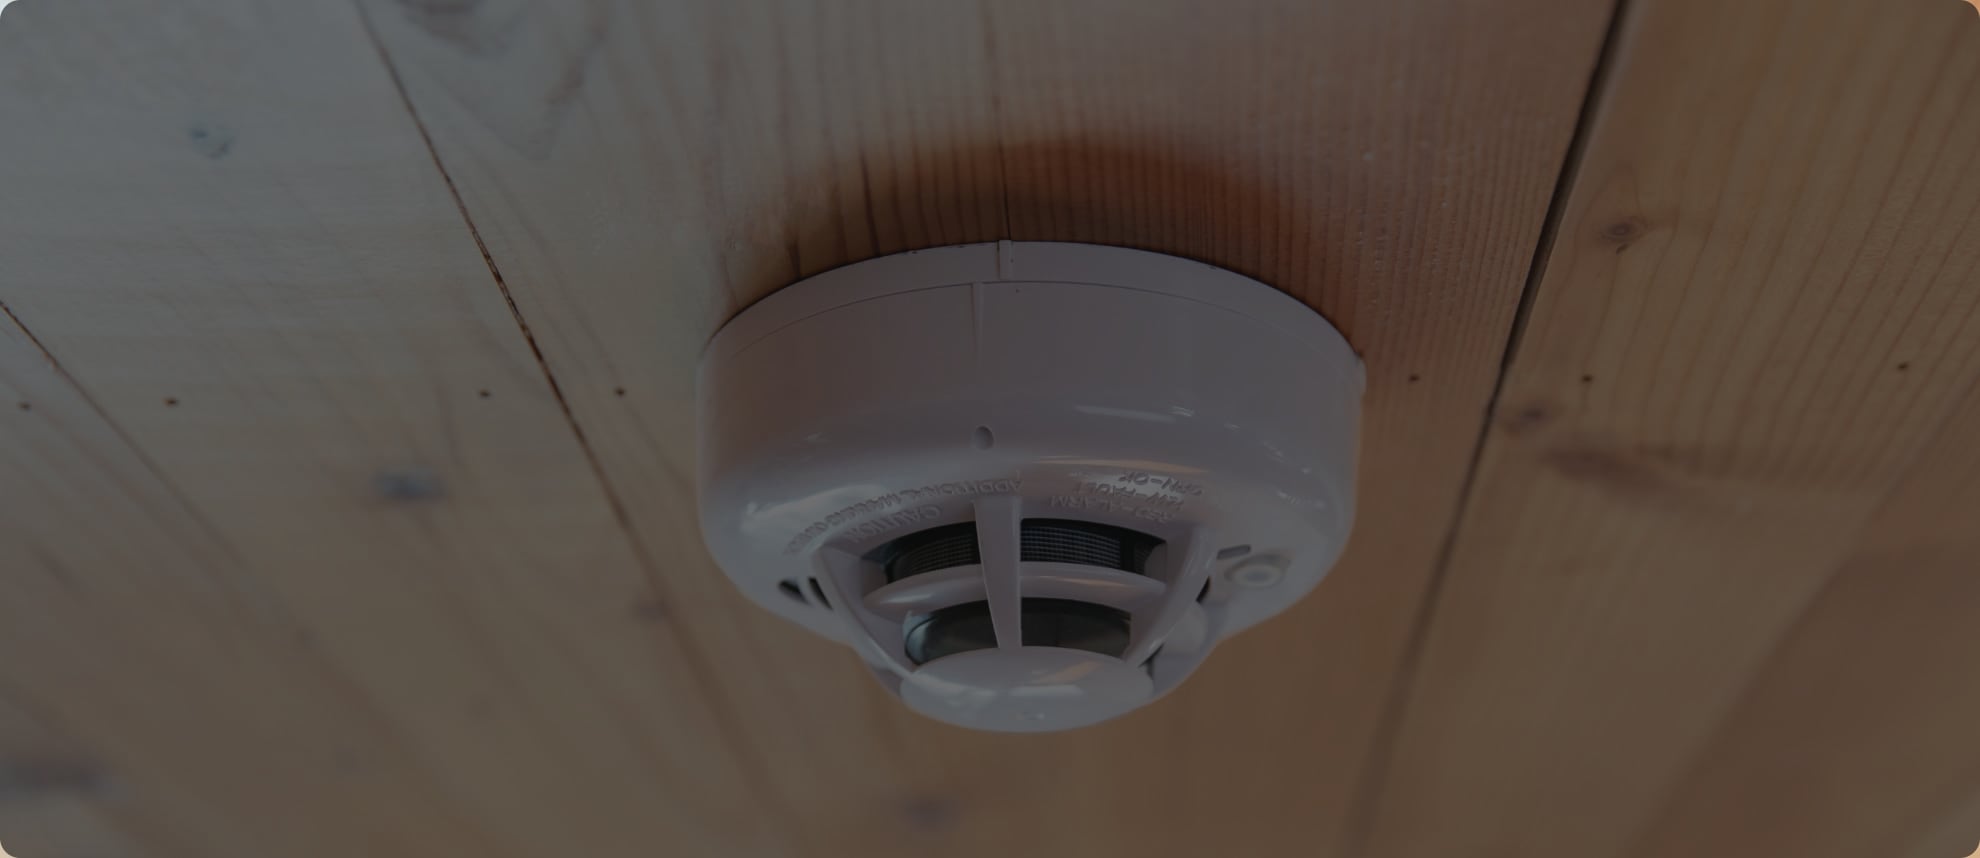 Vivint Monitored Smoke Alarm in Youngstown